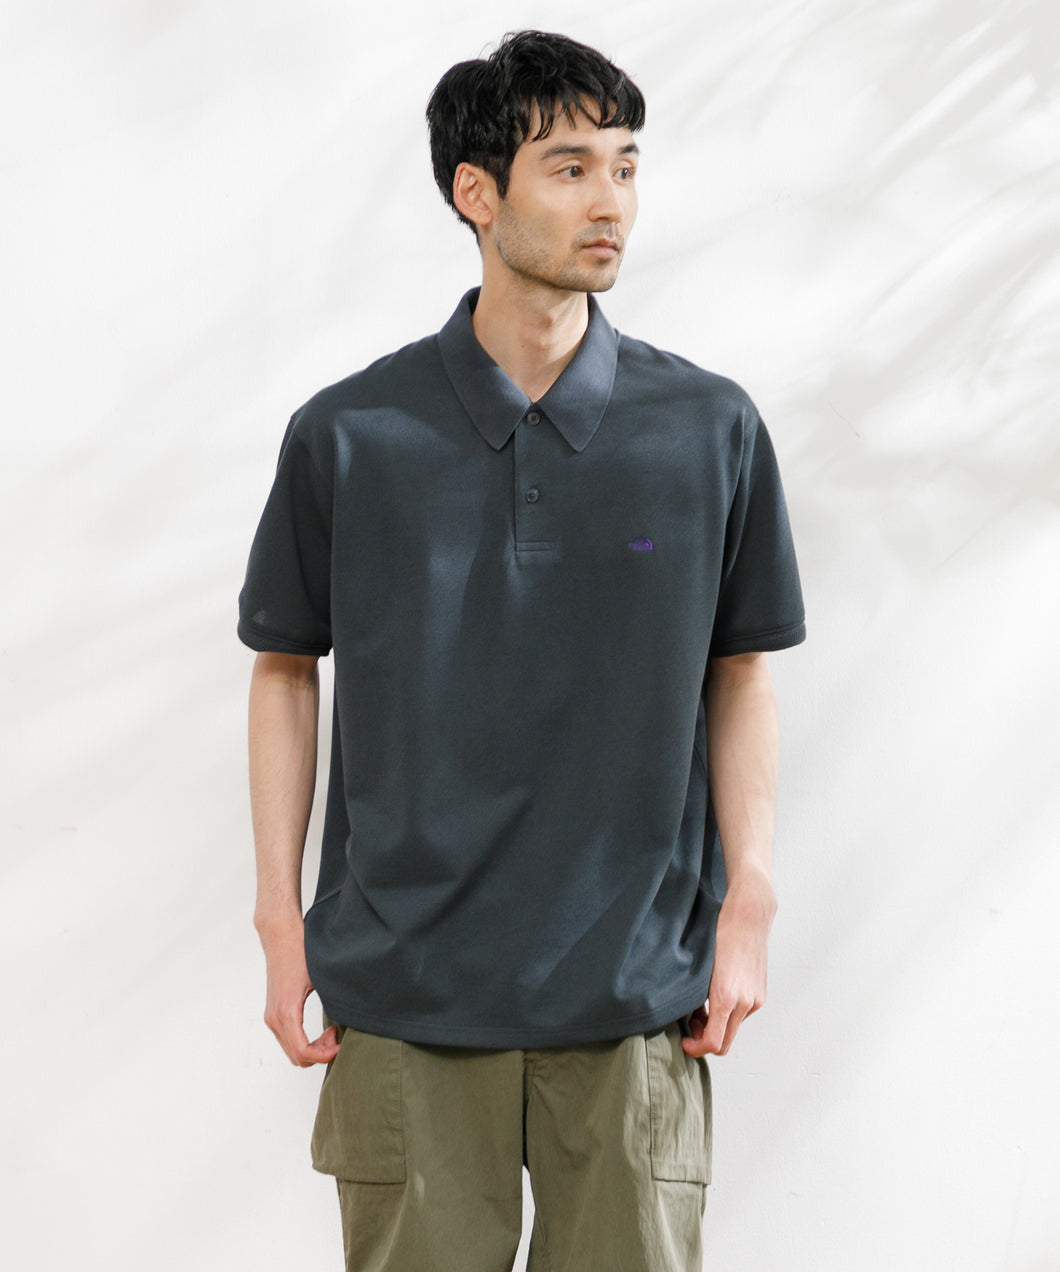 【MEN】THE NORTH FACE PURPLE LABEL Moss Stitch Field Short Sleeve Polo